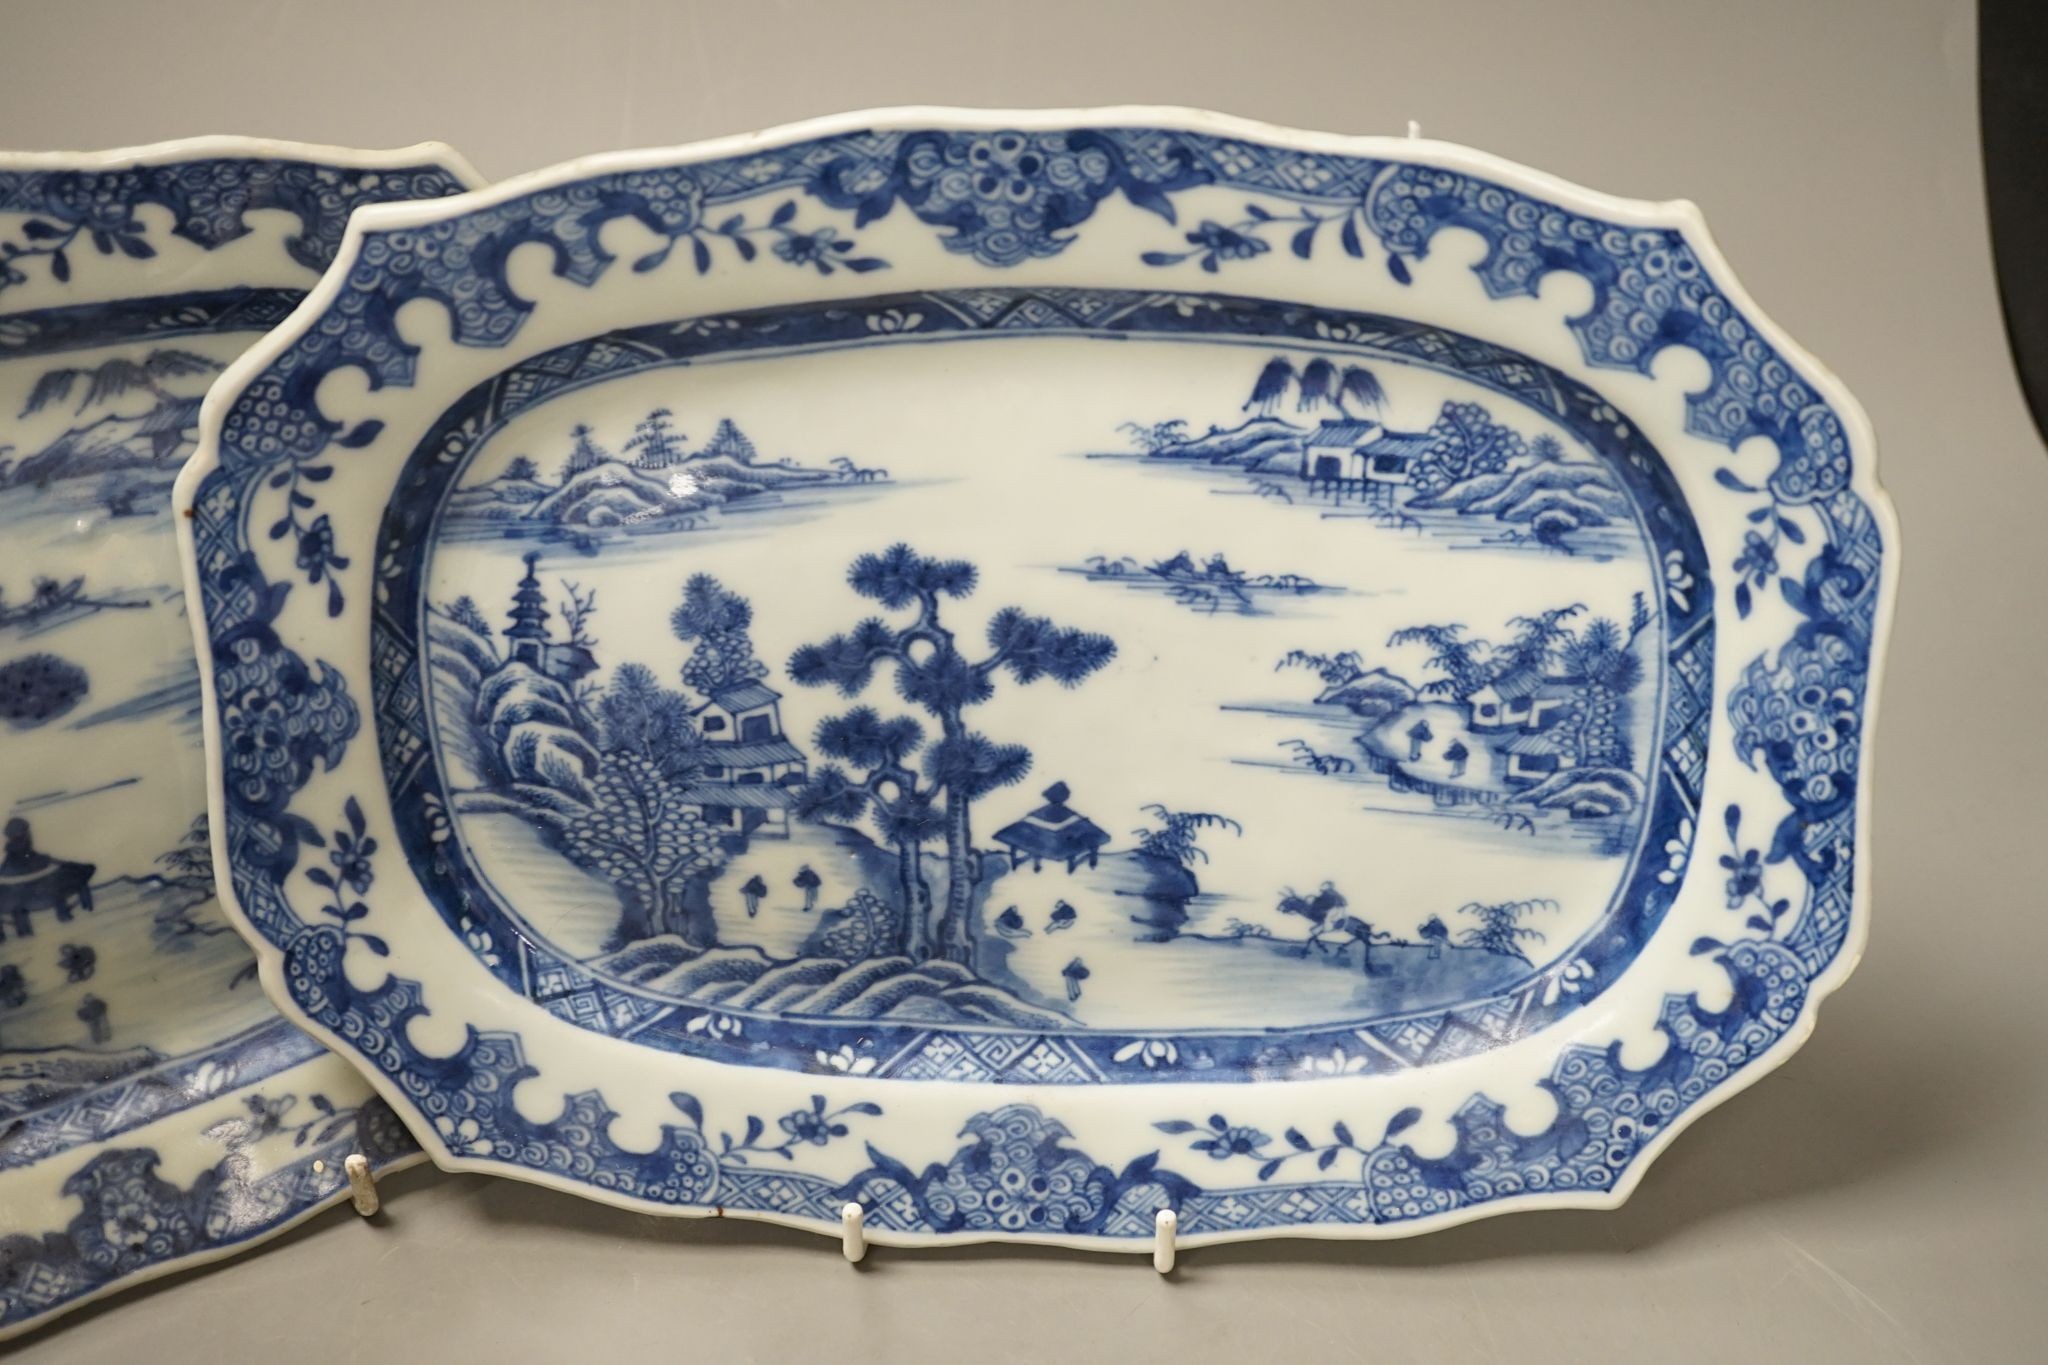 A pair of 18th century Chinese export Blue and white dishes, 27cm